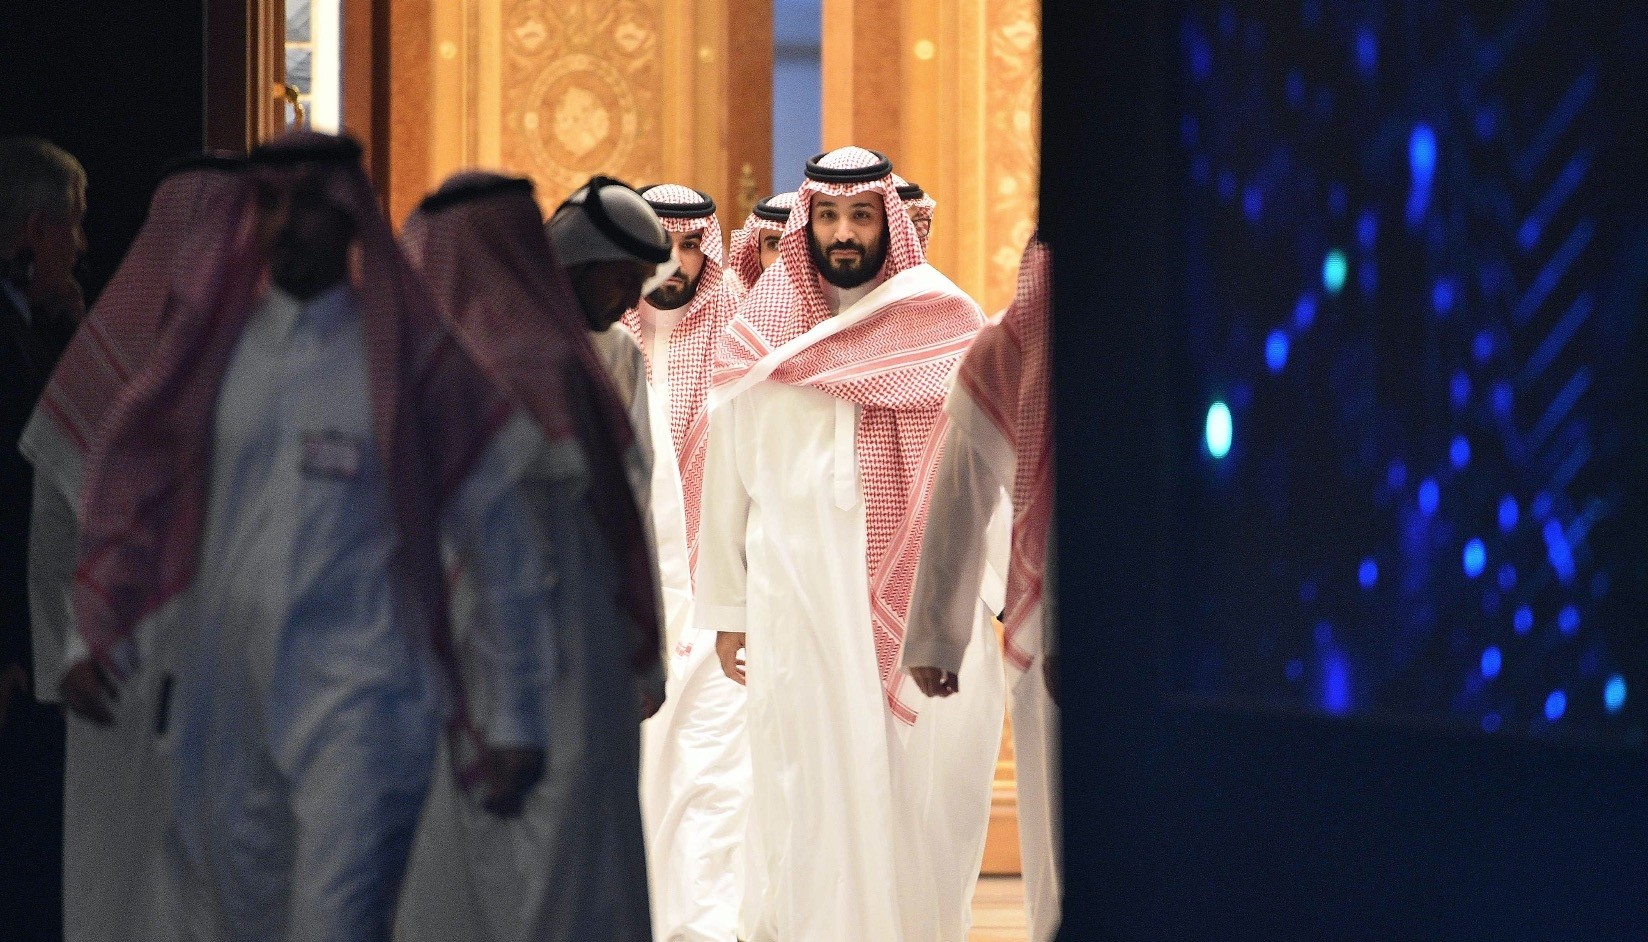 Saudi Crown Prince Mohammed bin Salman (C) arrives to attend a session during a conference in the Saudi capital Riyadh, Oct. 24, 2018.